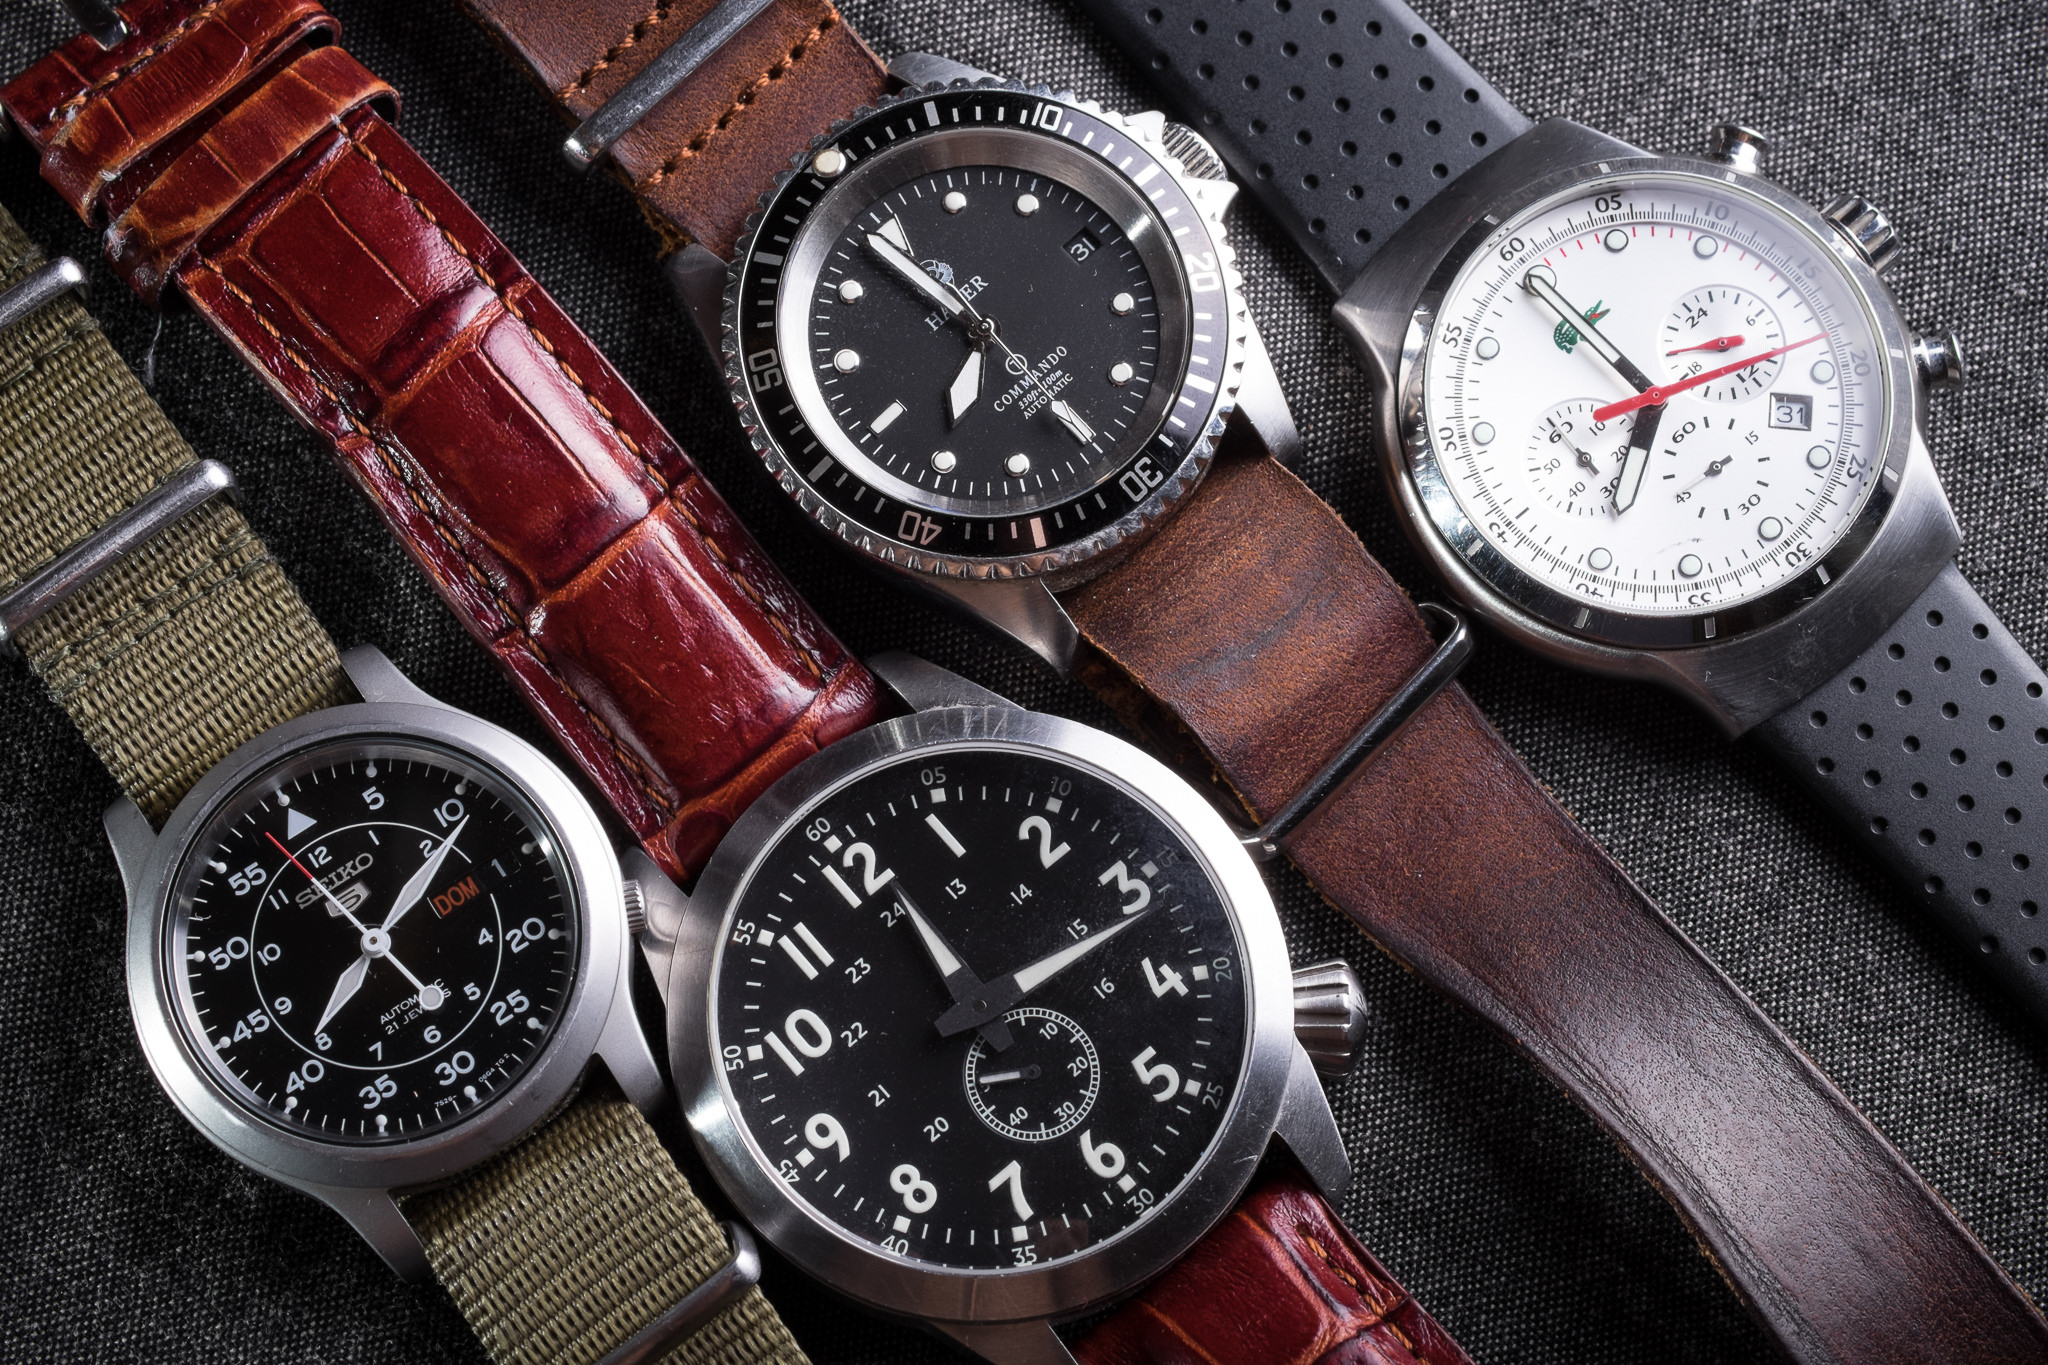 How to Choose a Watch: Tips for Buying a Timepiece for All Budgets